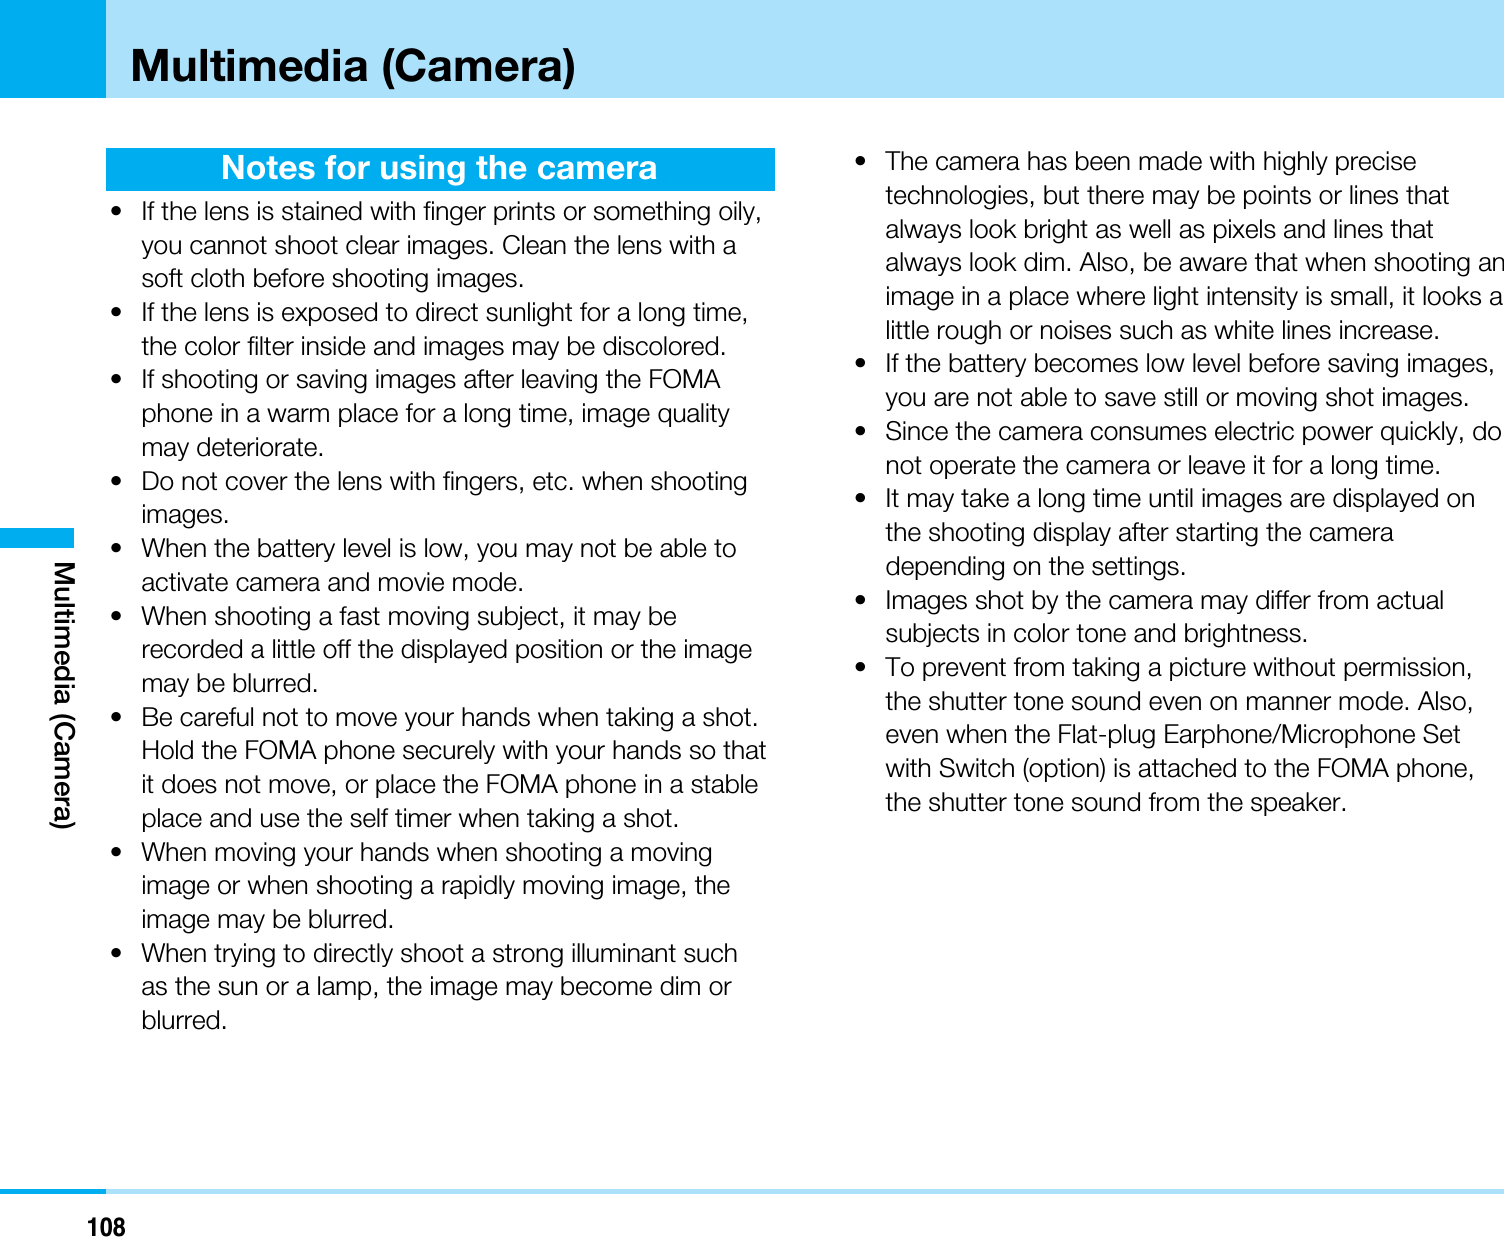 108Multimedia (Camera)Notes for using the camera• If the lens is stained with finger prints or something oily,you cannot shoot clear images. Clean the lens with asoft cloth before shooting images.• If the lens is exposed to direct sunlight for a long time,the color filter inside and images may be discolored.• If shooting or saving images after leaving the FOMAphone in a warm place for a long time, image qualitymay deteriorate.• Do not cover the lens with fingers, etc. when shootingimages.• When the battery level is low, you may not be able toactivate camera and movie mode.• When shooting a fast moving subject, it may berecorded a little off the displayed position or the imagemay be blurred.• Be careful not to move your hands when taking a shot.Hold the FOMA phone securely with your hands so thatit does not move, or place the FOMA phone in a stableplace and use the self timer when taking a shot.• When moving your hands when shooting a movingimage or when shooting a rapidly moving image, theimage may be blurred.• When trying to directly shoot a strong illuminant suchas the sun or a lamp, the image may become dim orblurred.• The camera has been made with highly precisetechnologies, but there may be points or lines thatalways look bright as well as pixels and lines thatalways look dim. Also, be aware that when shooting animage in a place where light intensity is small, it looks alittle rough or noises such as white lines increase.• If the battery becomes low level before saving images,you are not able to save still or moving shot images.• Since the camera consumes electric power quickly, donot operate the camera or leave it for a long time.• It may take a long time until images are displayed onthe shooting display after starting the cameradepending on the settings.• Images shot by the camera may differ from actualsubjects in color tone and brightness.• To prevent from taking a picture without permission,the shutter tone sound even on manner mode. Also,even when the Flat-plug Earphone/Microphone Setwith Switch (option) is attached to the FOMA phone,the shutter tone sound from the speaker.Multimedia (Camera)